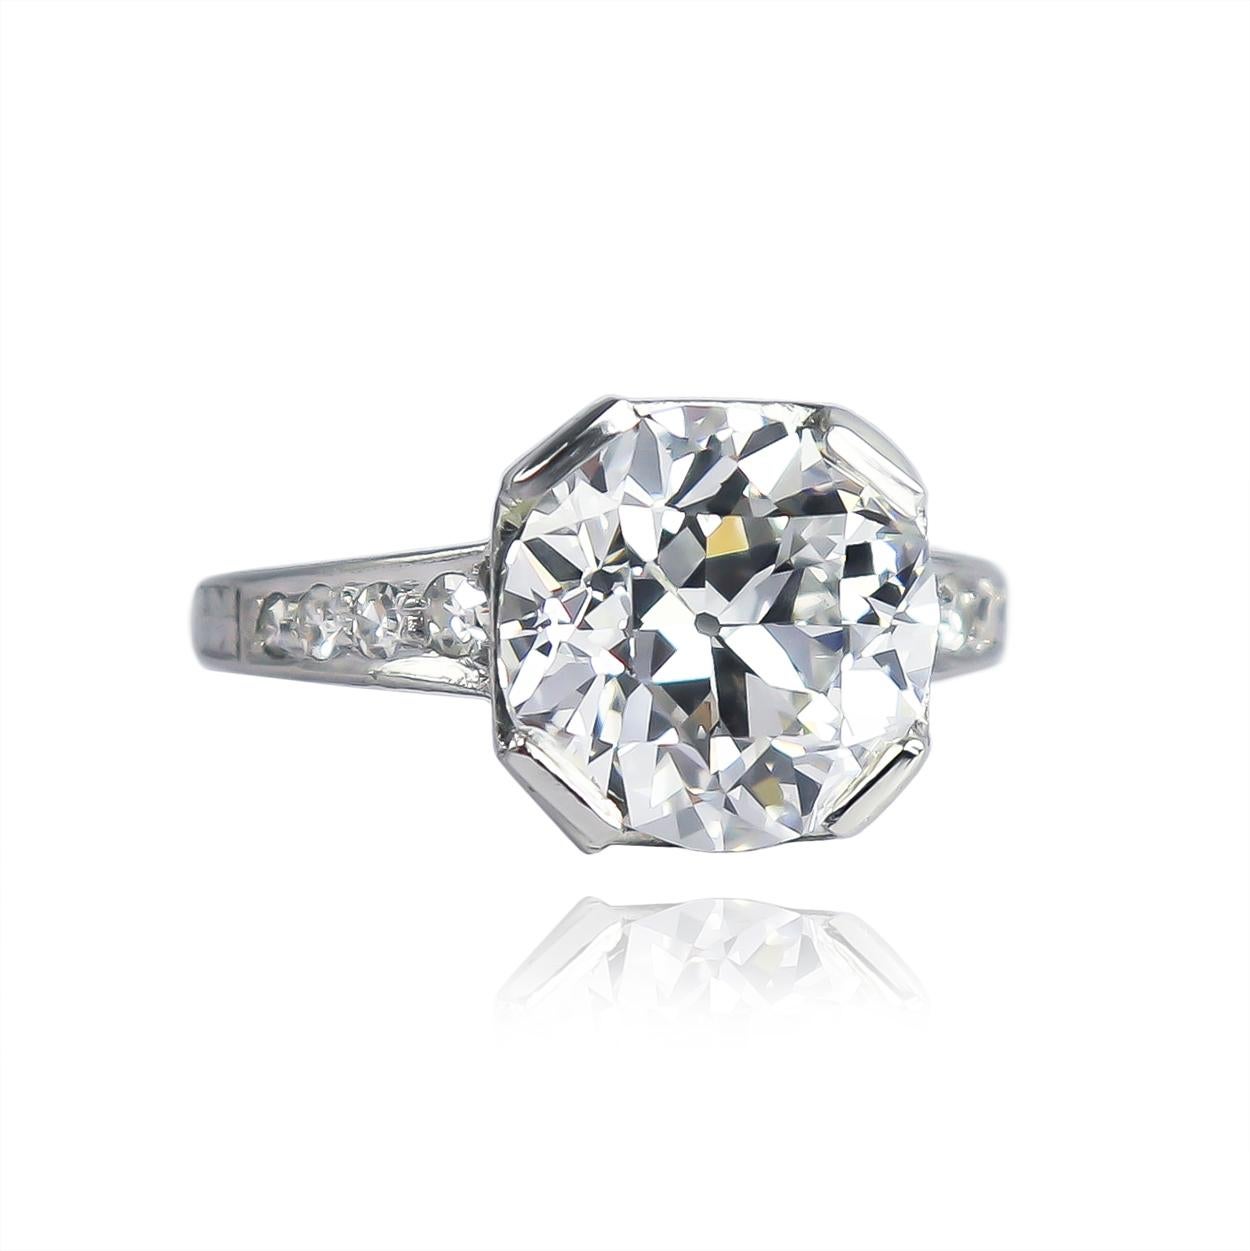 This incredible vintage ring from the J. Birnbach collection features a GIA certified 4.68 carat Old European cut diamond of E color and VS2 clarity... Set in a platinum, vintage ring with assorted single-cut diamonds, this piece is charming and